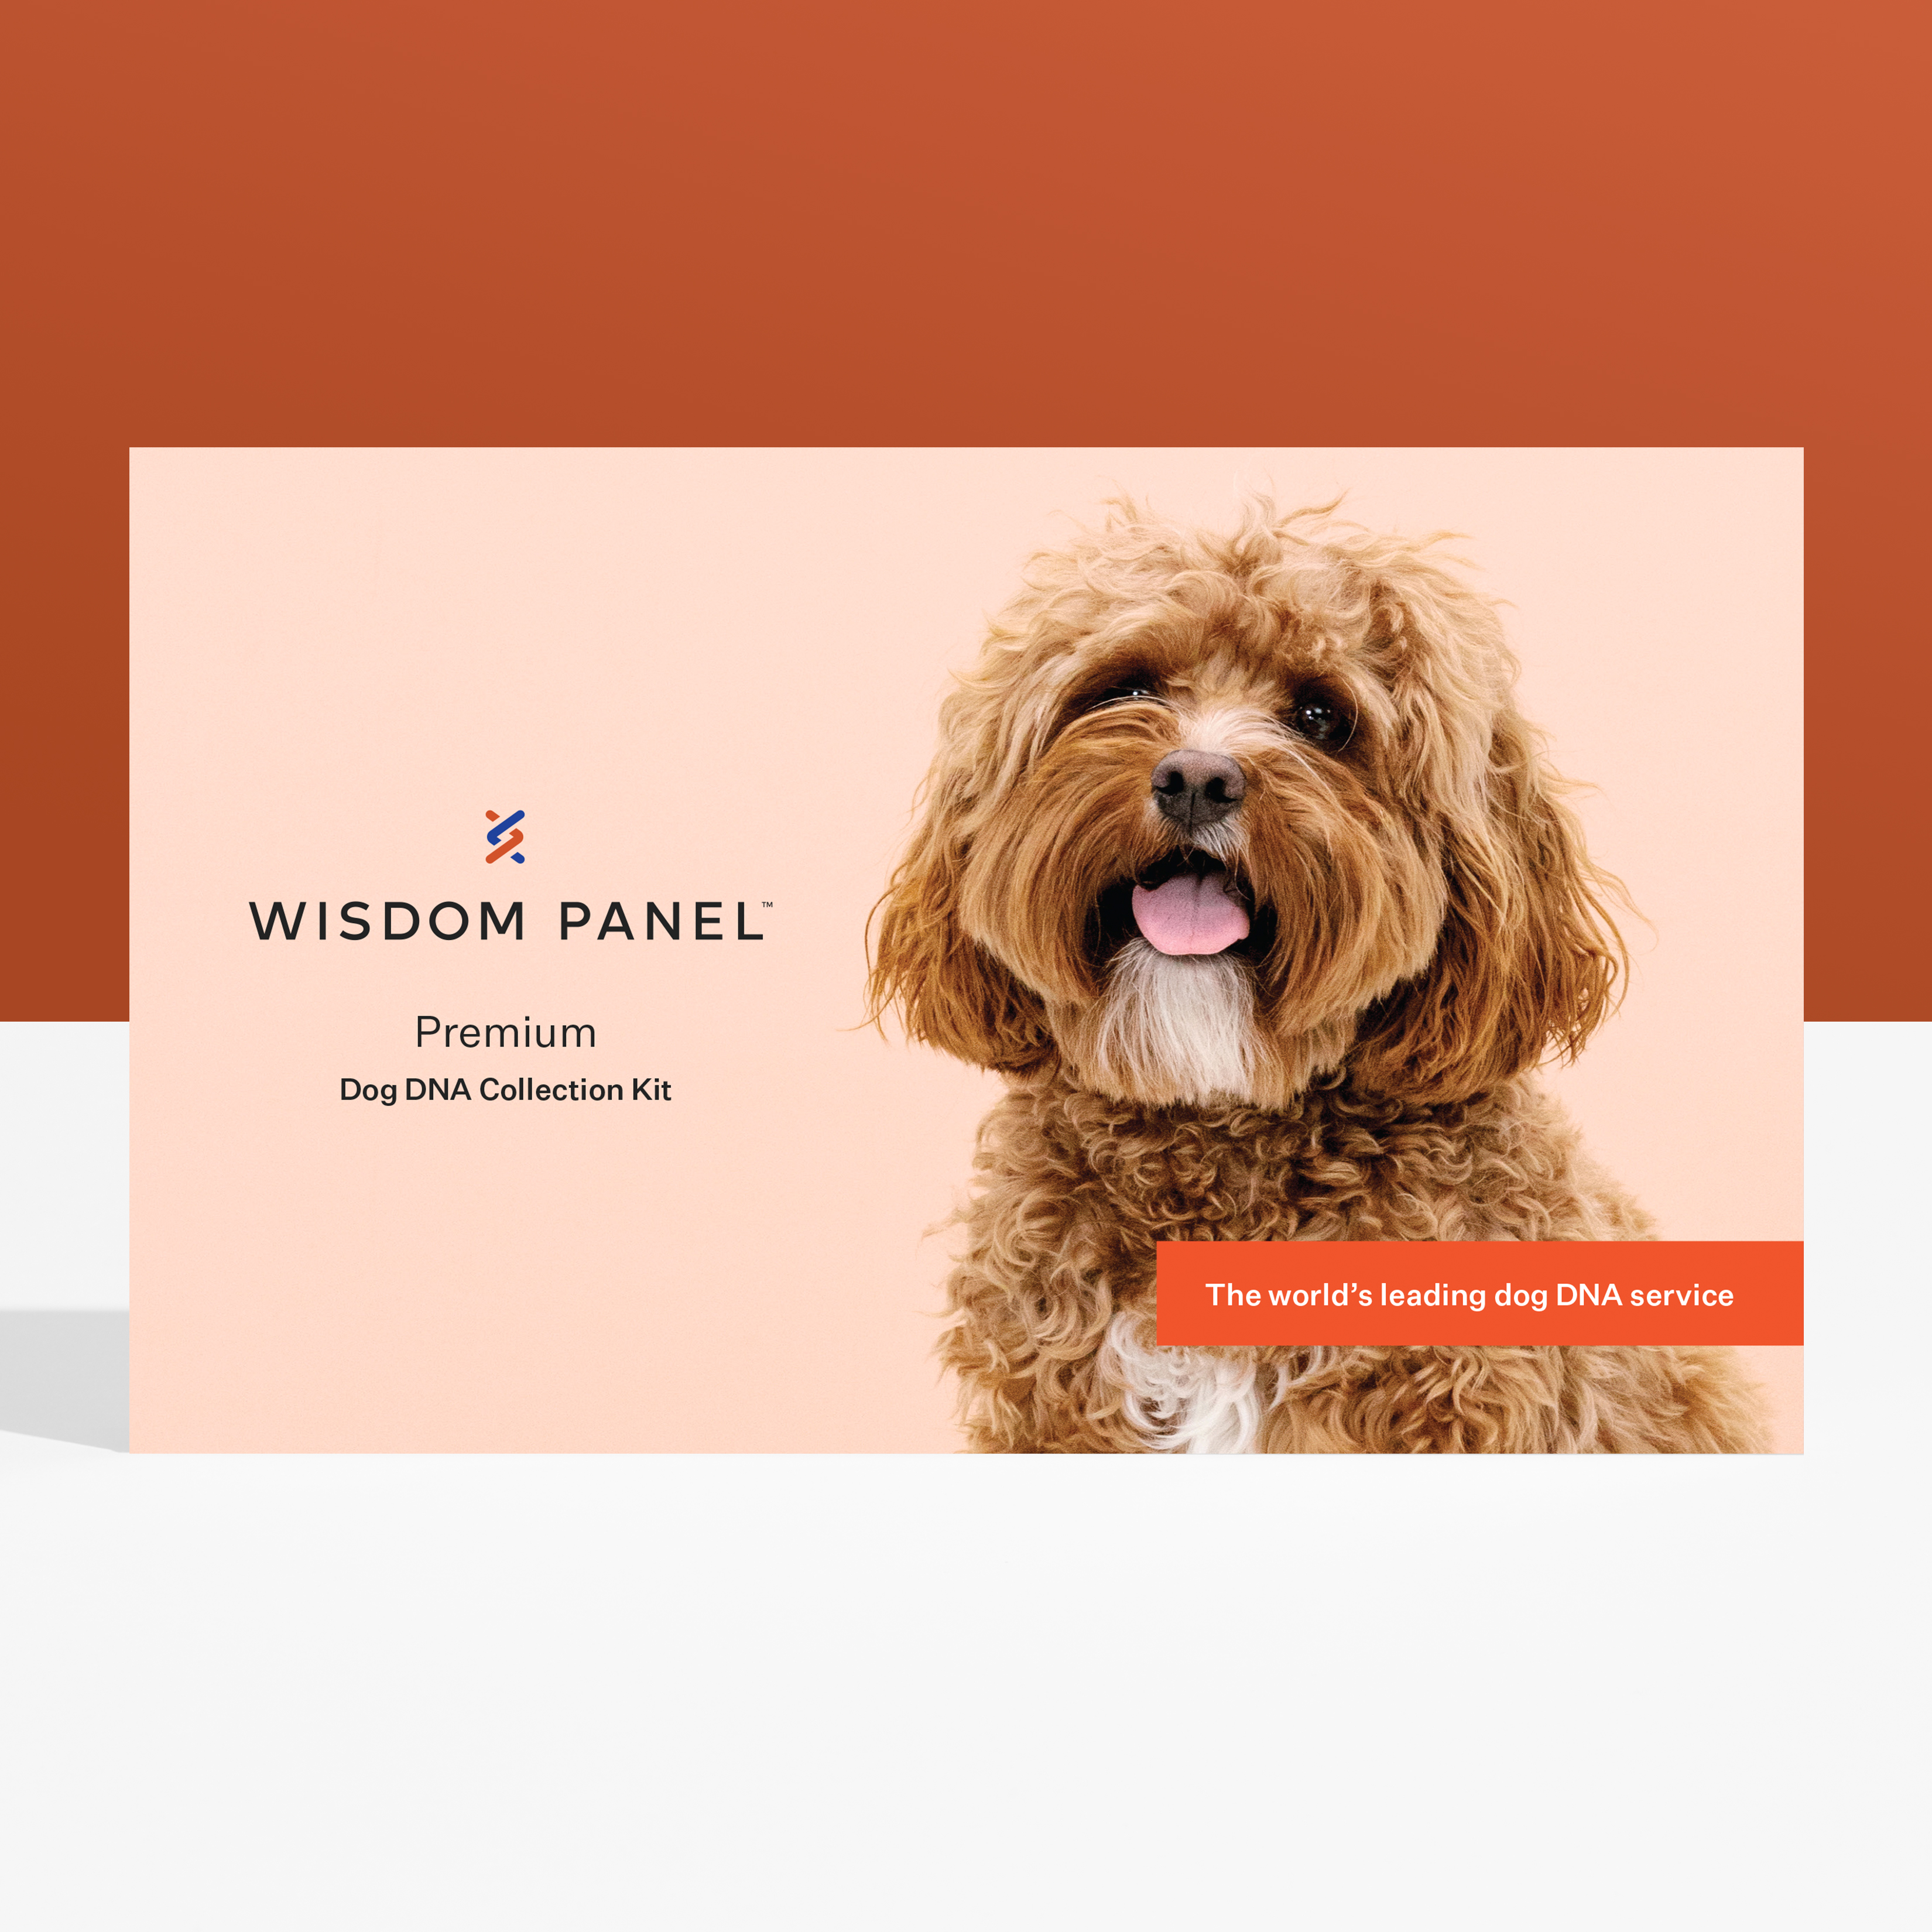 wisdom panel for dogs